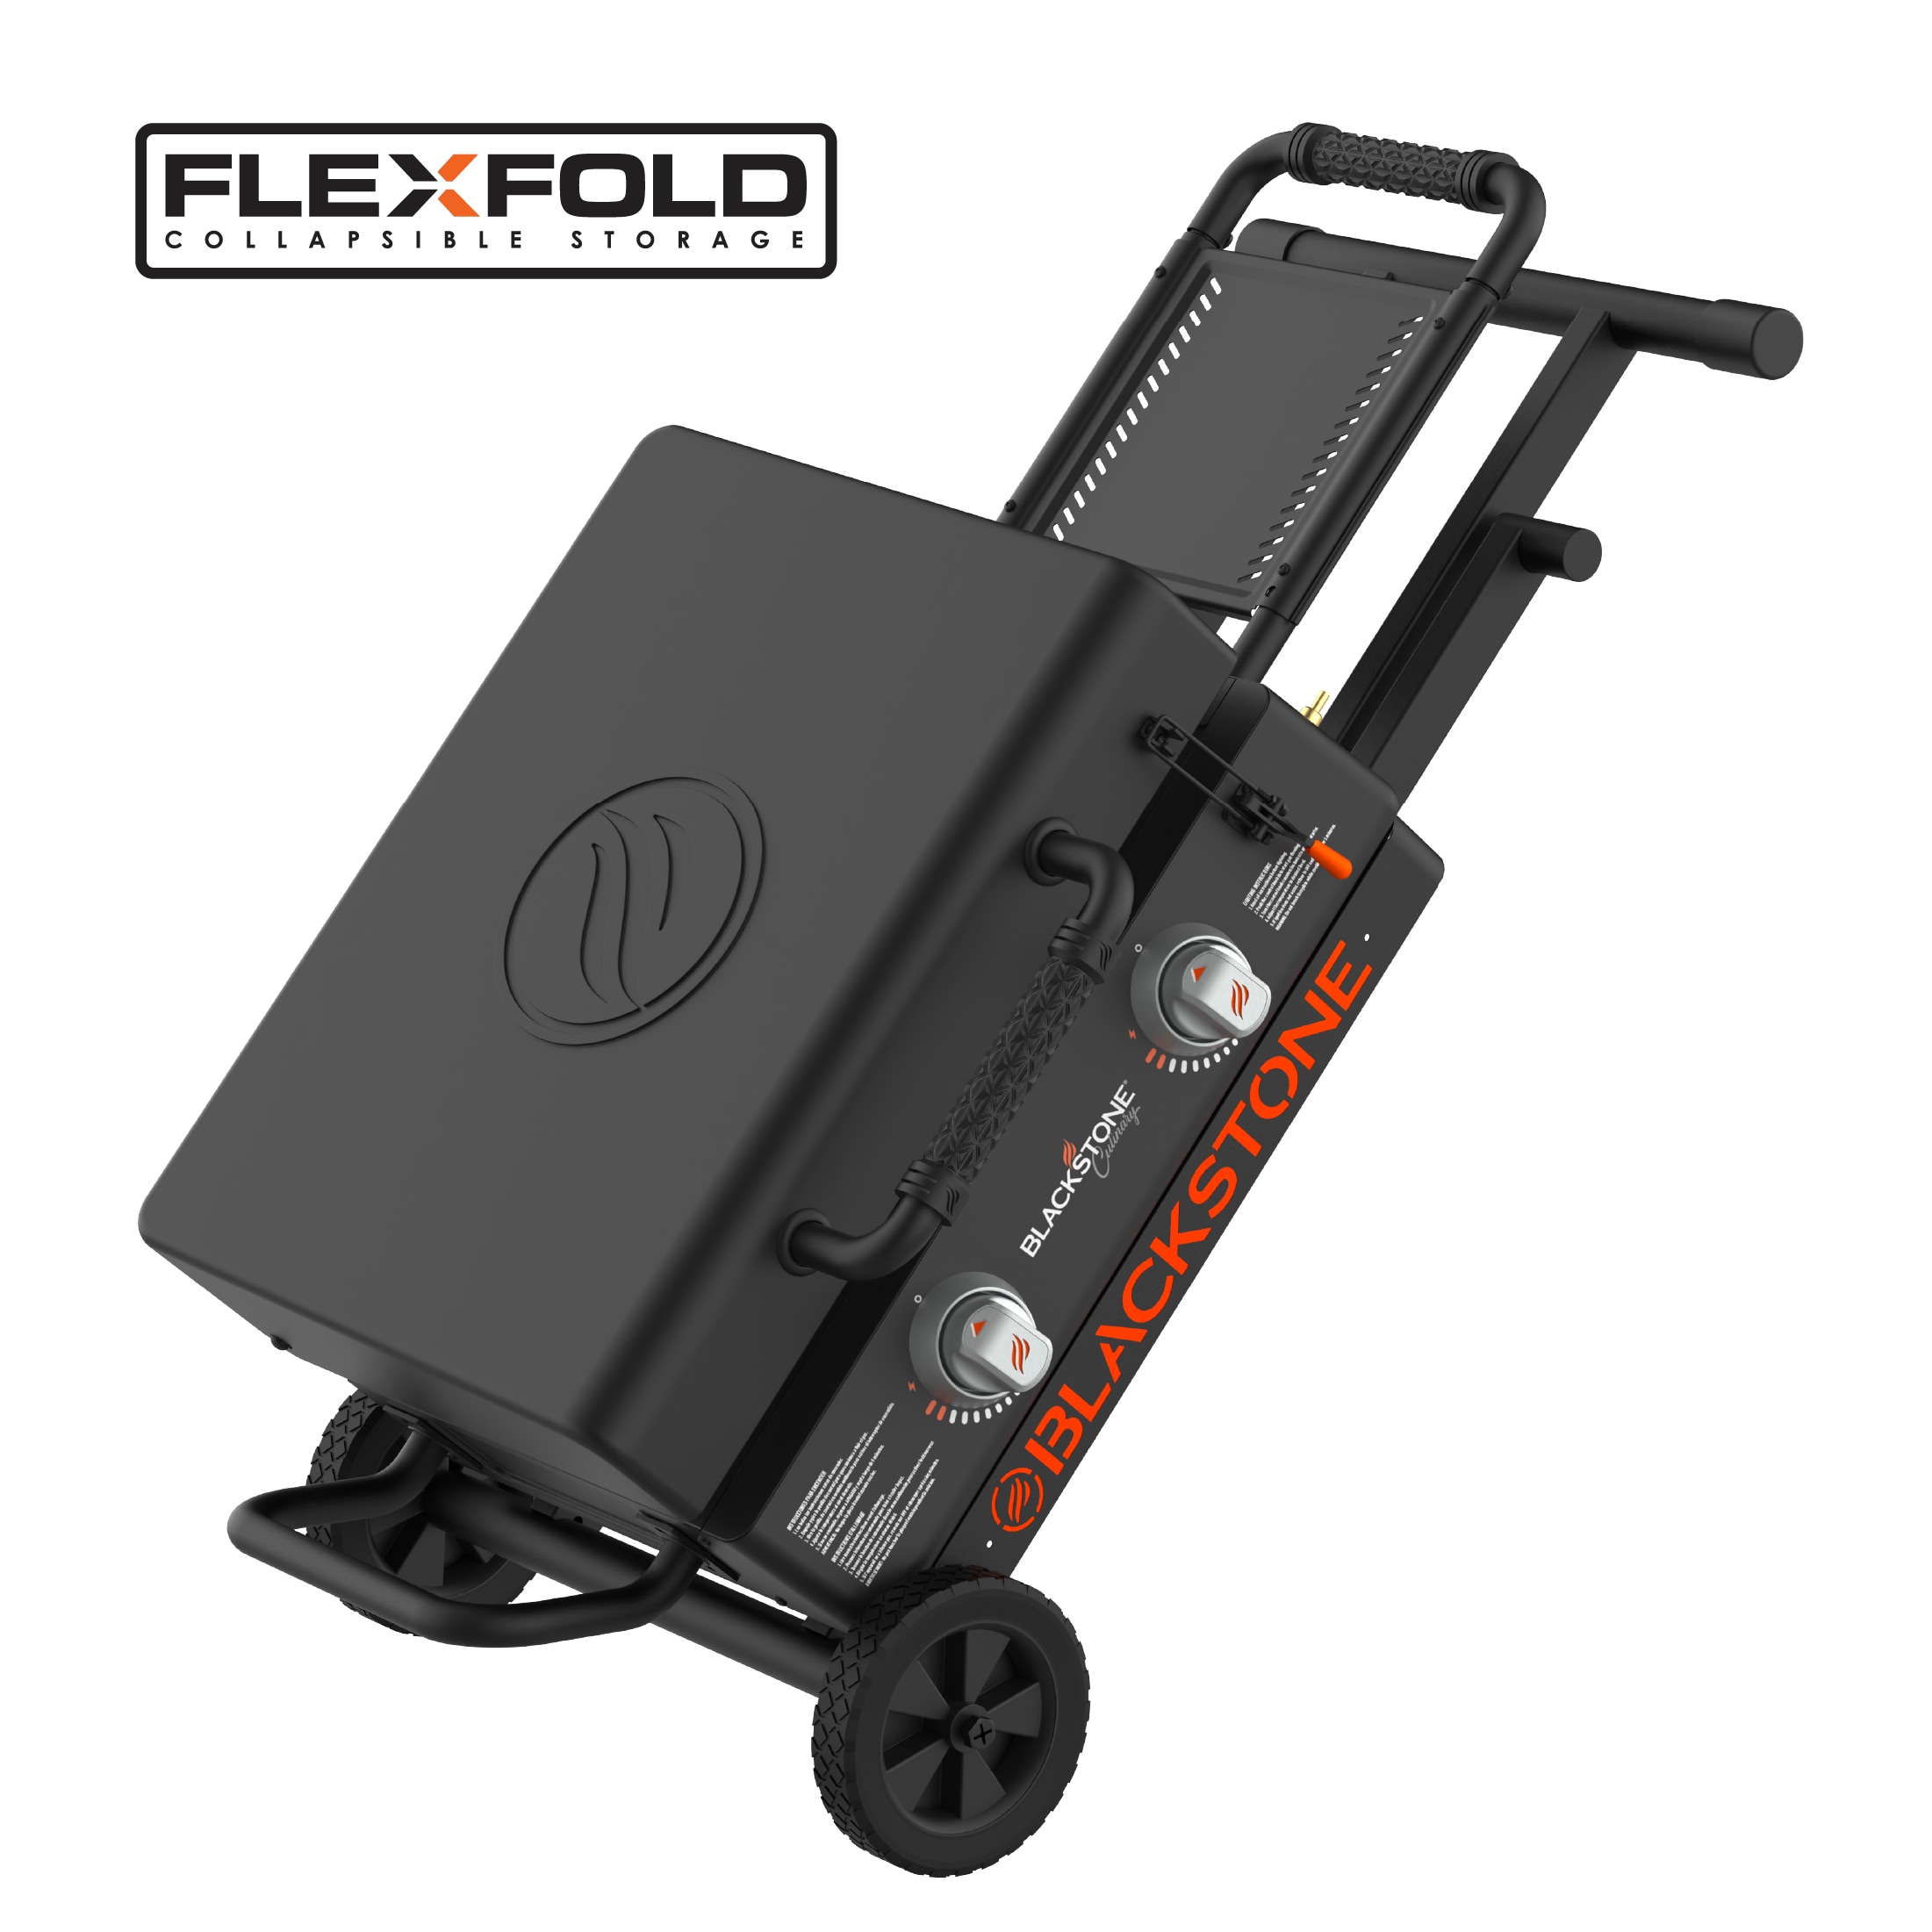 GrillPartsReplacement - Online BBQ Parts Retailer Portable Rolling Cart Folding Collapsible Grill Stand for Blackstone 17 inch, 22 inch Flat Top Griddles